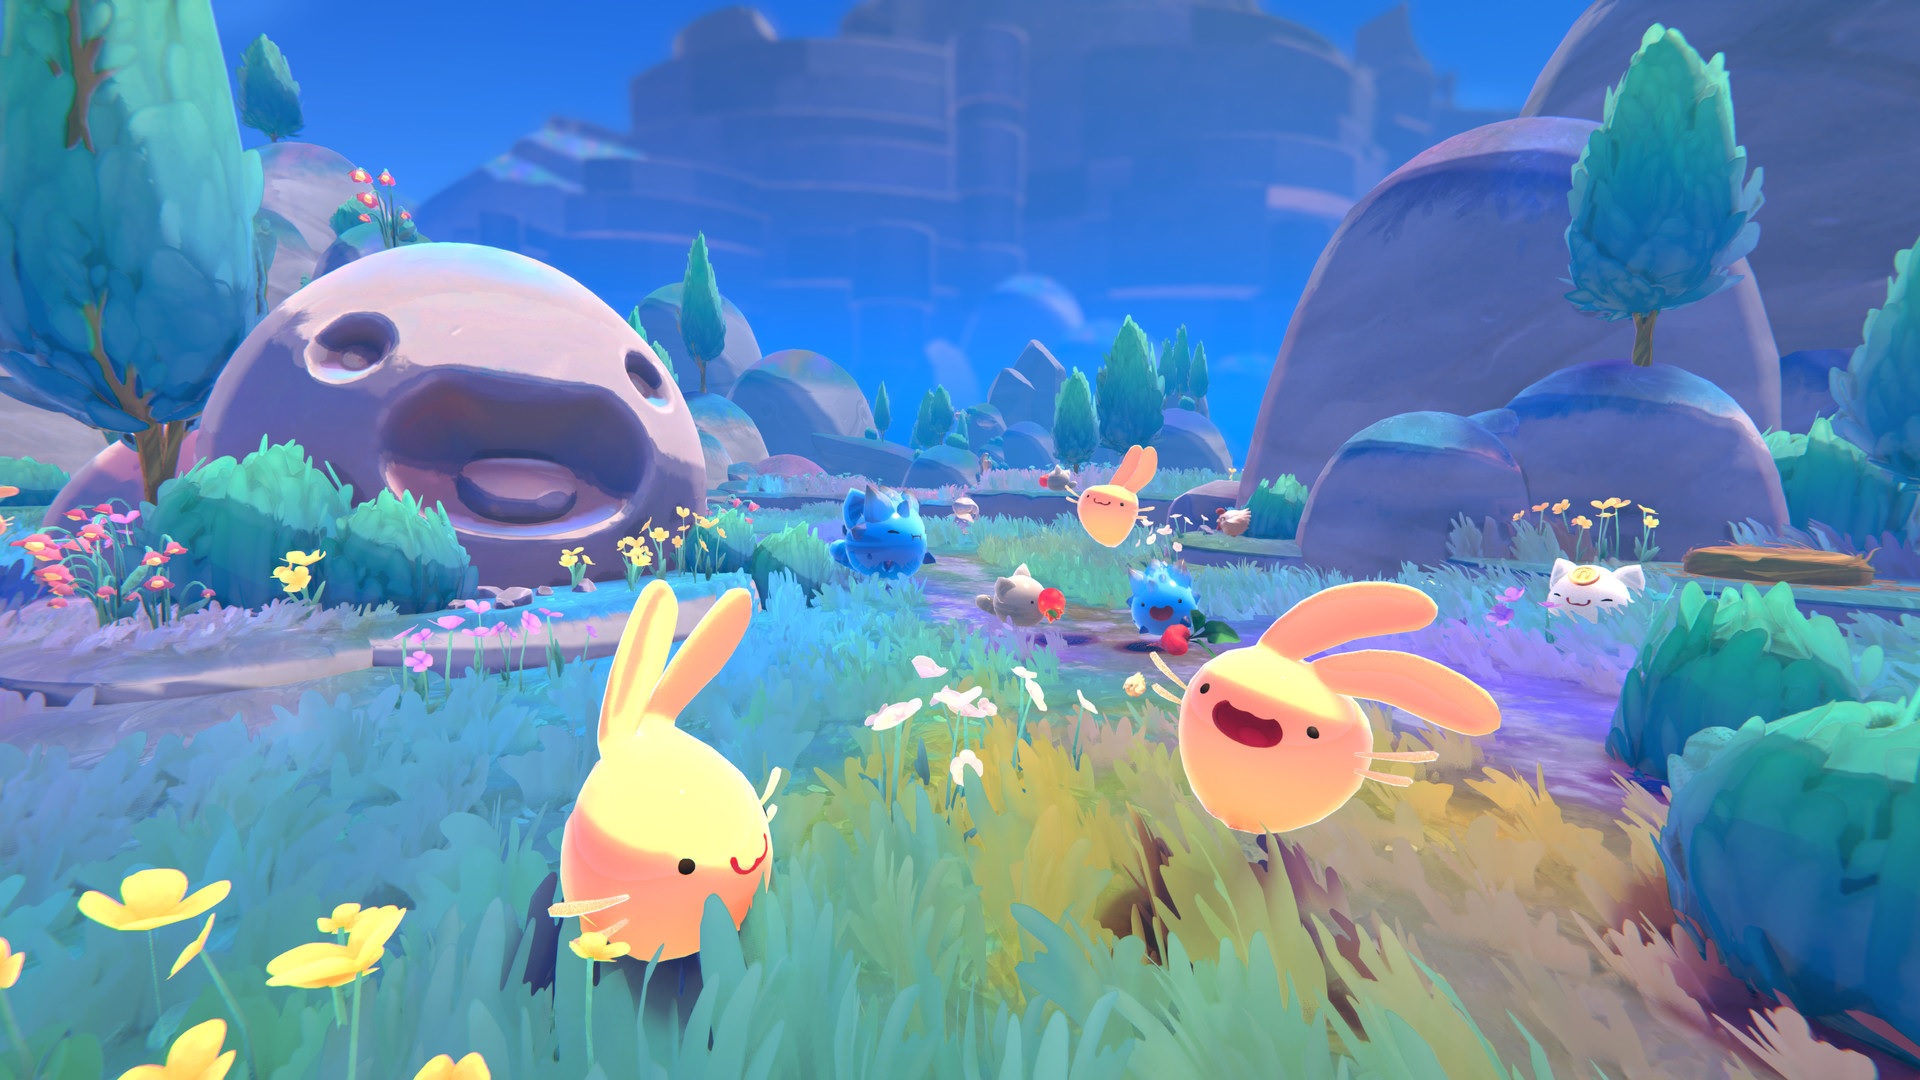 Slime Rancher 2 release time explained - early access starts soon